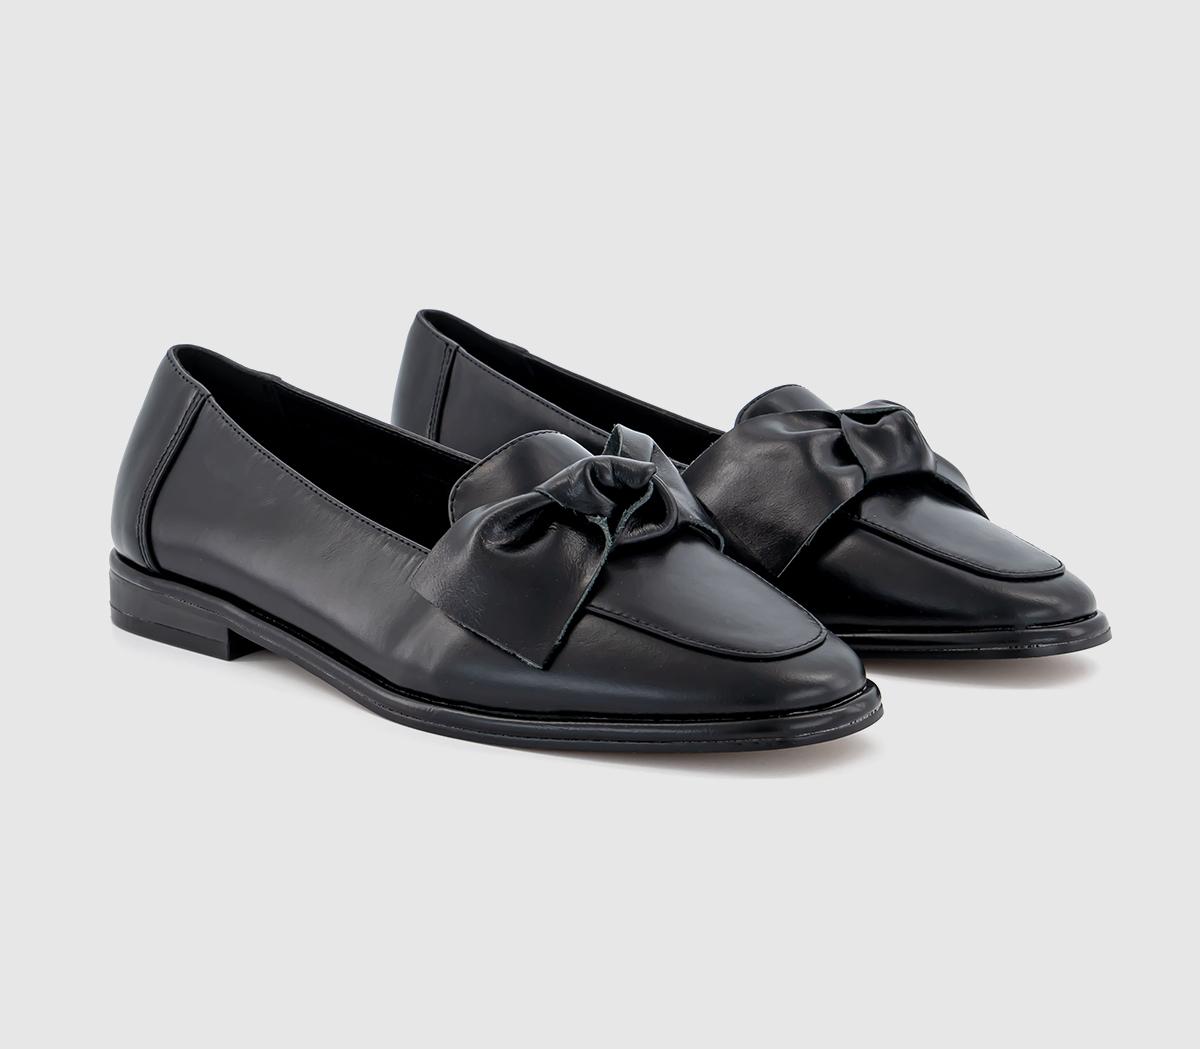 OFFICE Womens Fallon Bow Leather Loafer Black Leather, 3